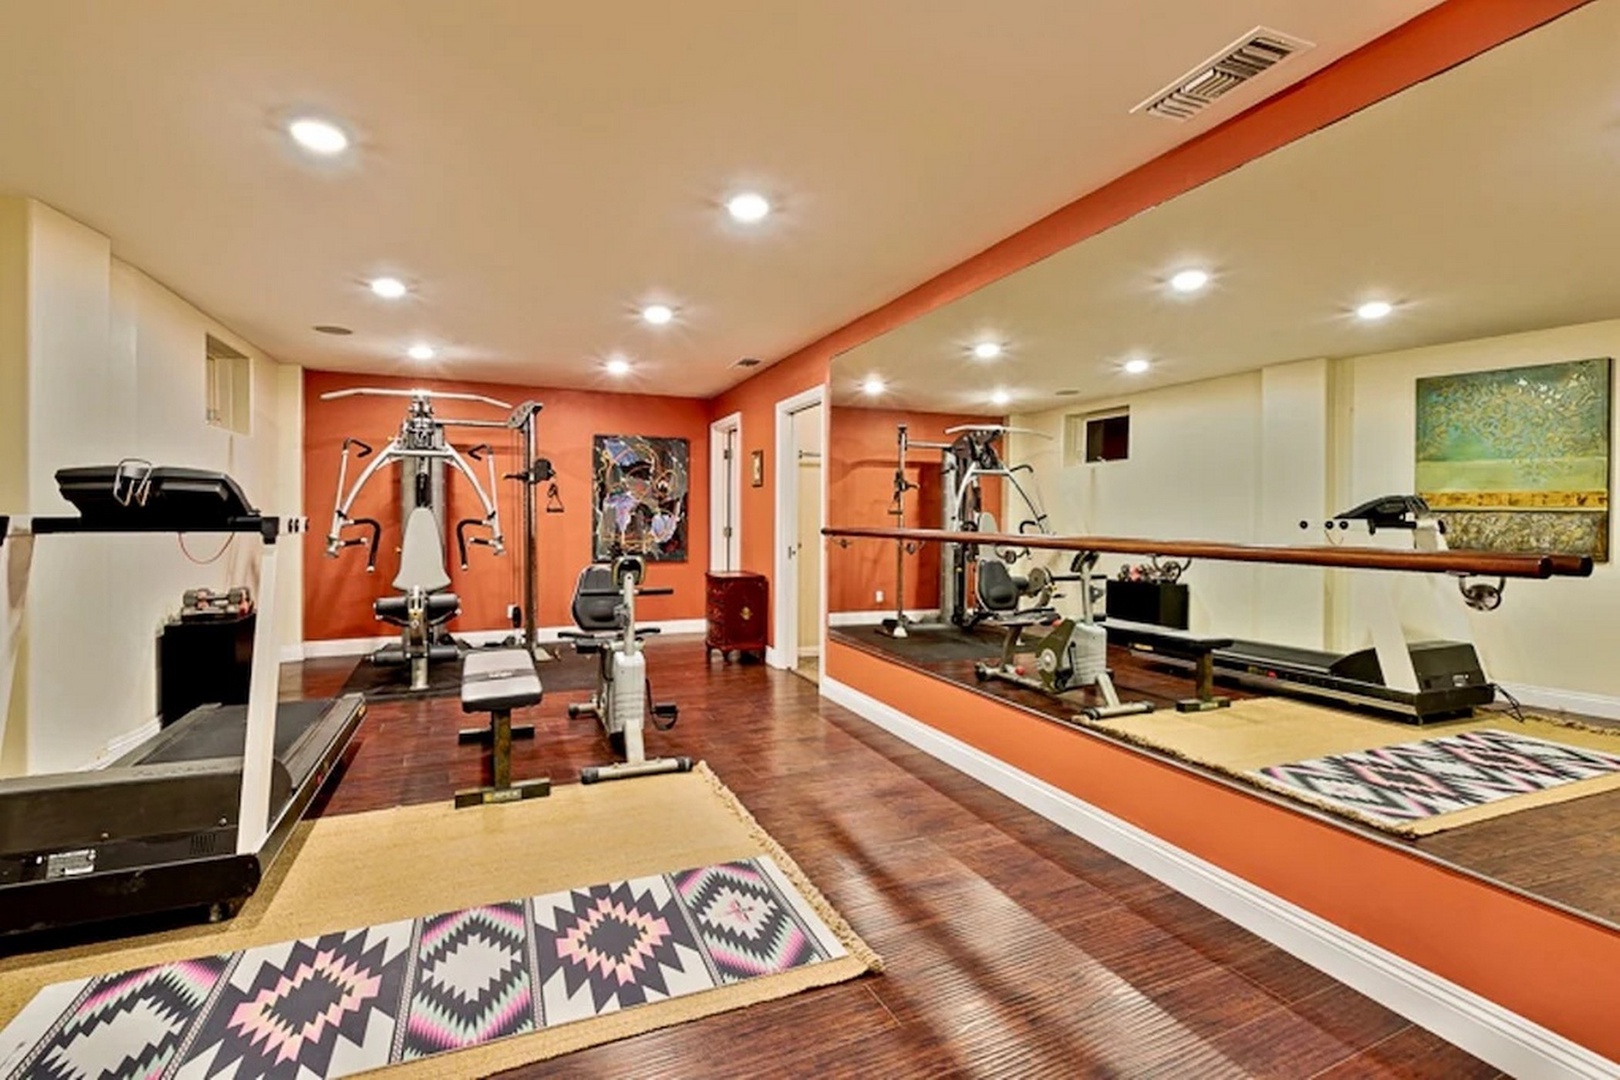 In-home gym